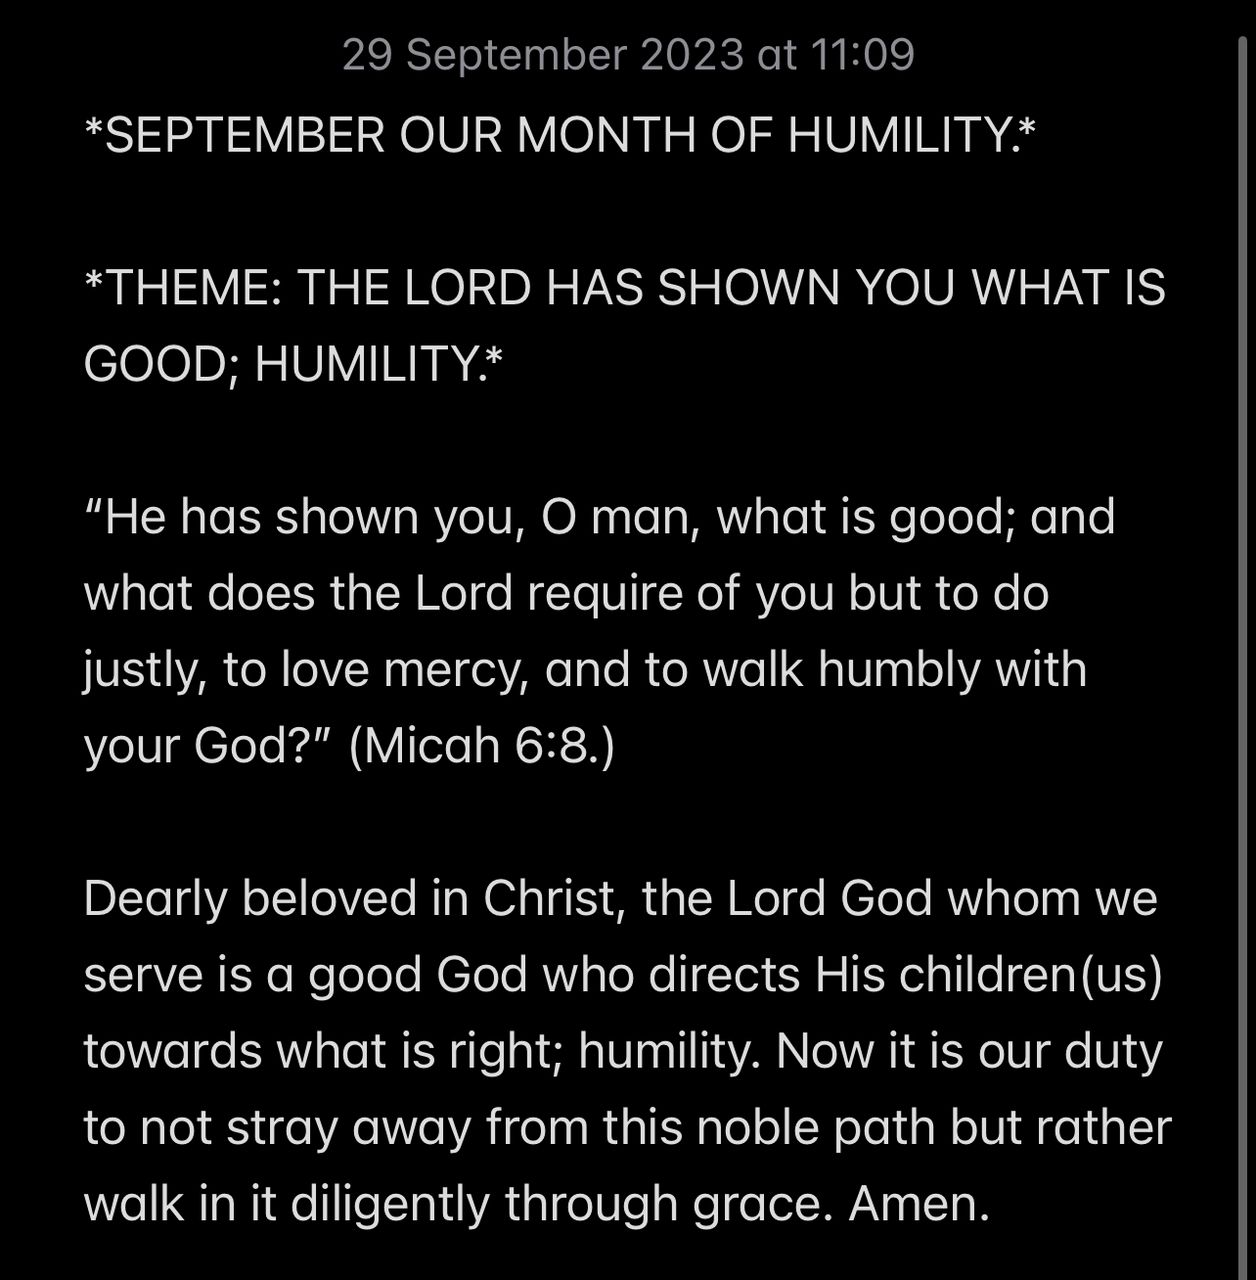 THE LORD HAS SHOWN YOU WHAT IS GOOD; HUMILITY.